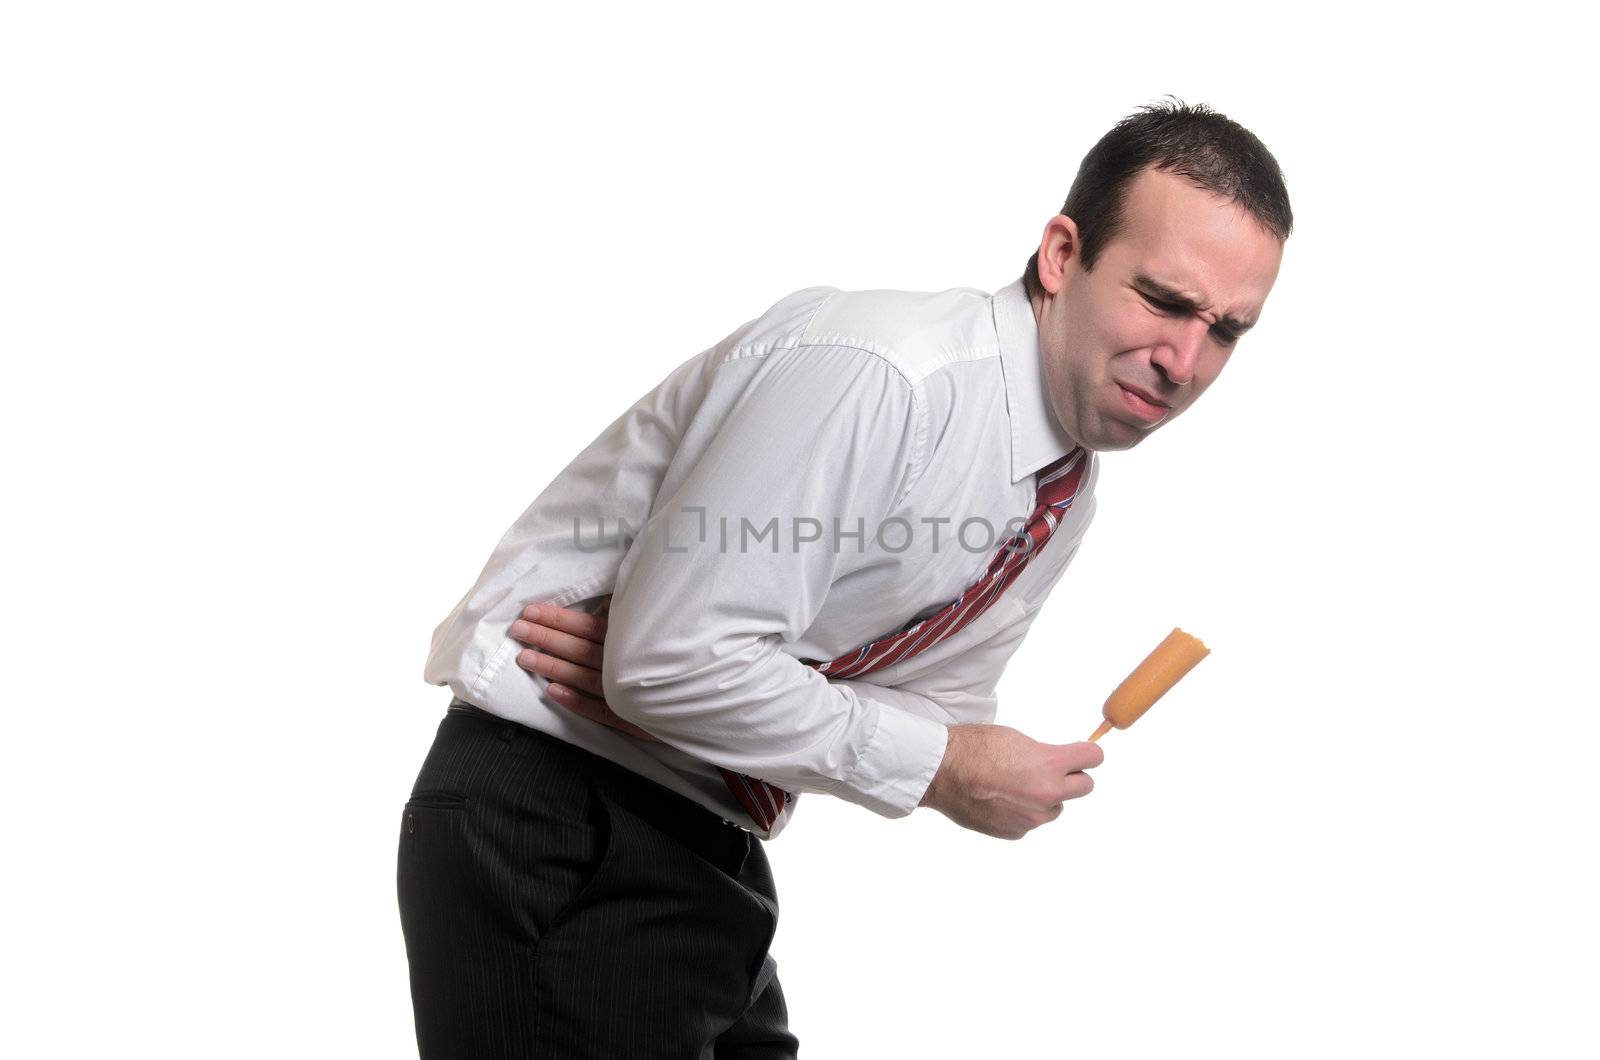 A young man suffering from food poisoning from eating a bad corn dog, isolated against a white background.